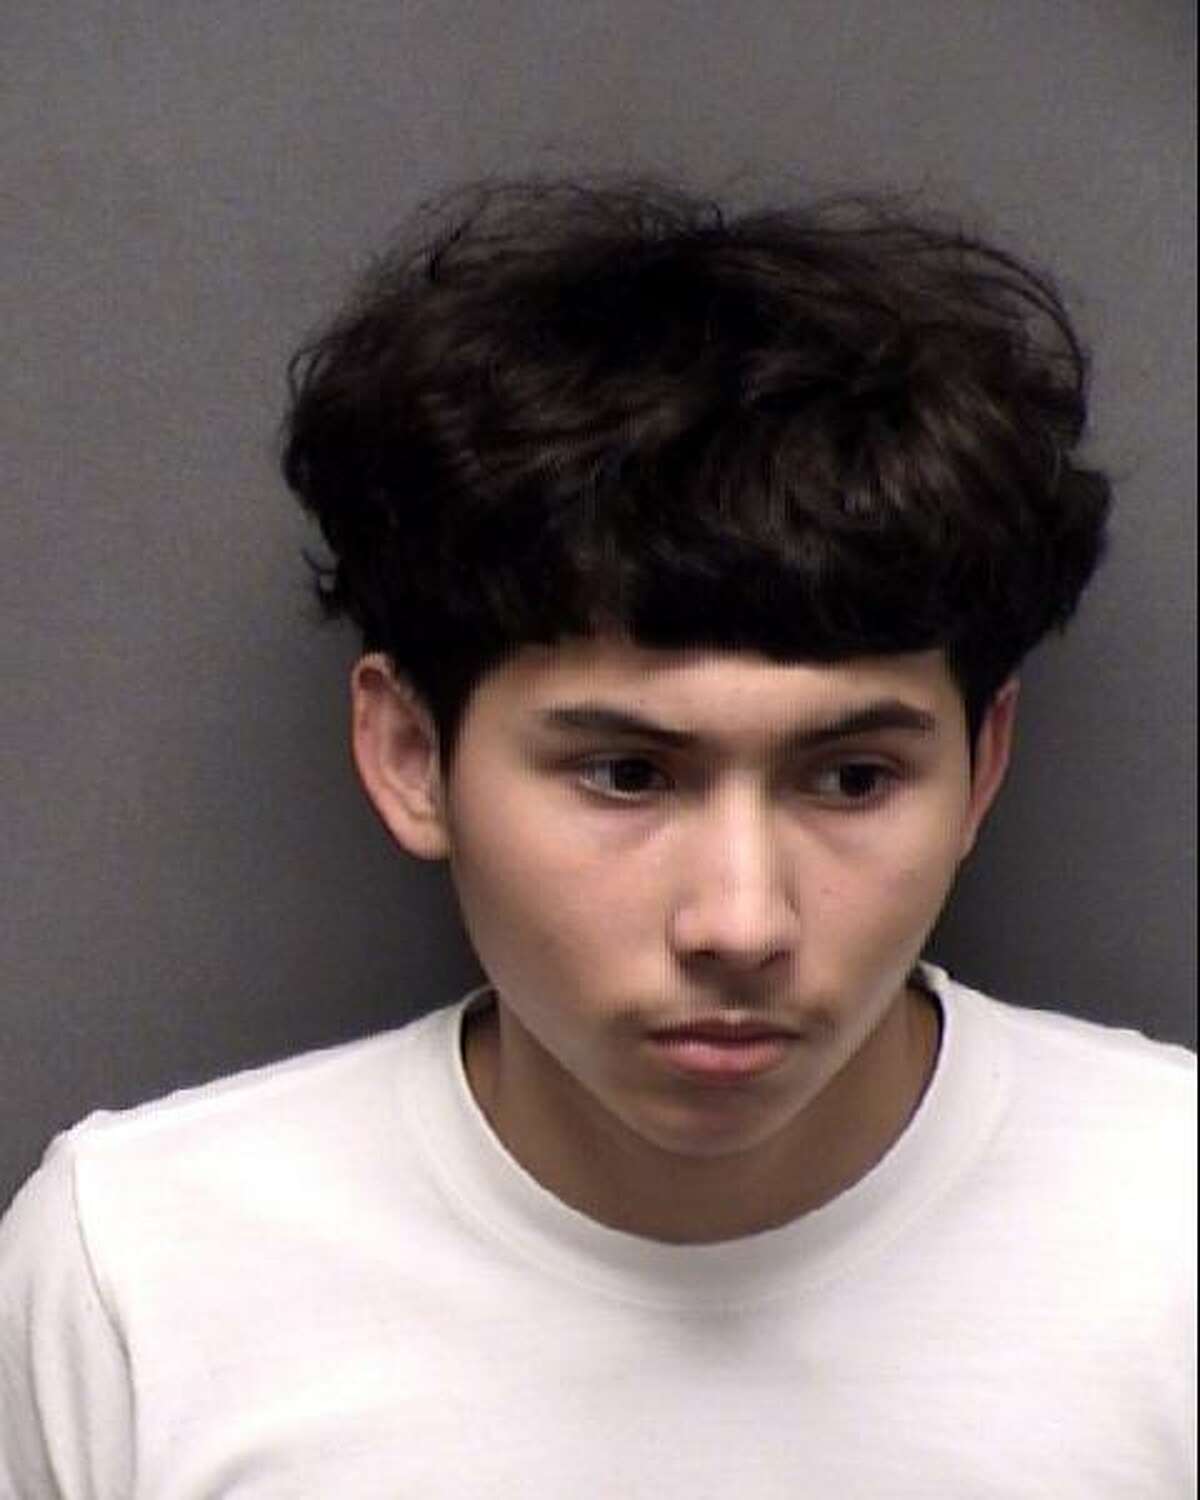 Antonio Rodriguez, 17, was arrested on suspicion of murder in the death of 16-year-old Anthony Rodriguez.